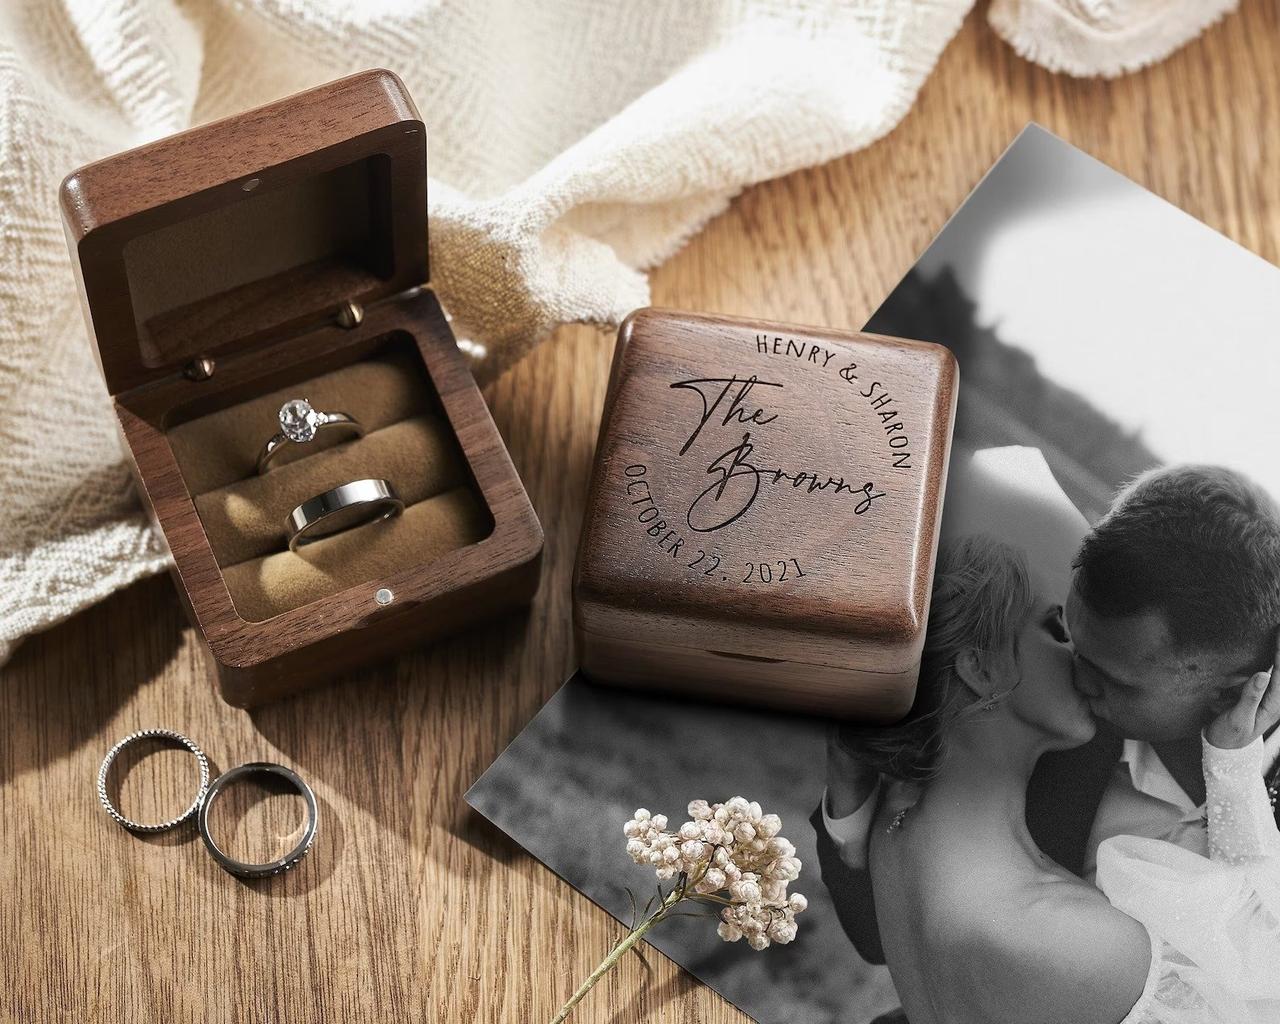 DIY Marriage Proposal Box for the Mr. or Mrs. To Be with Woodsbury -  Tidewater and Tulle | Timeless Modern Wedding Blog with DIY Wedding Ideas